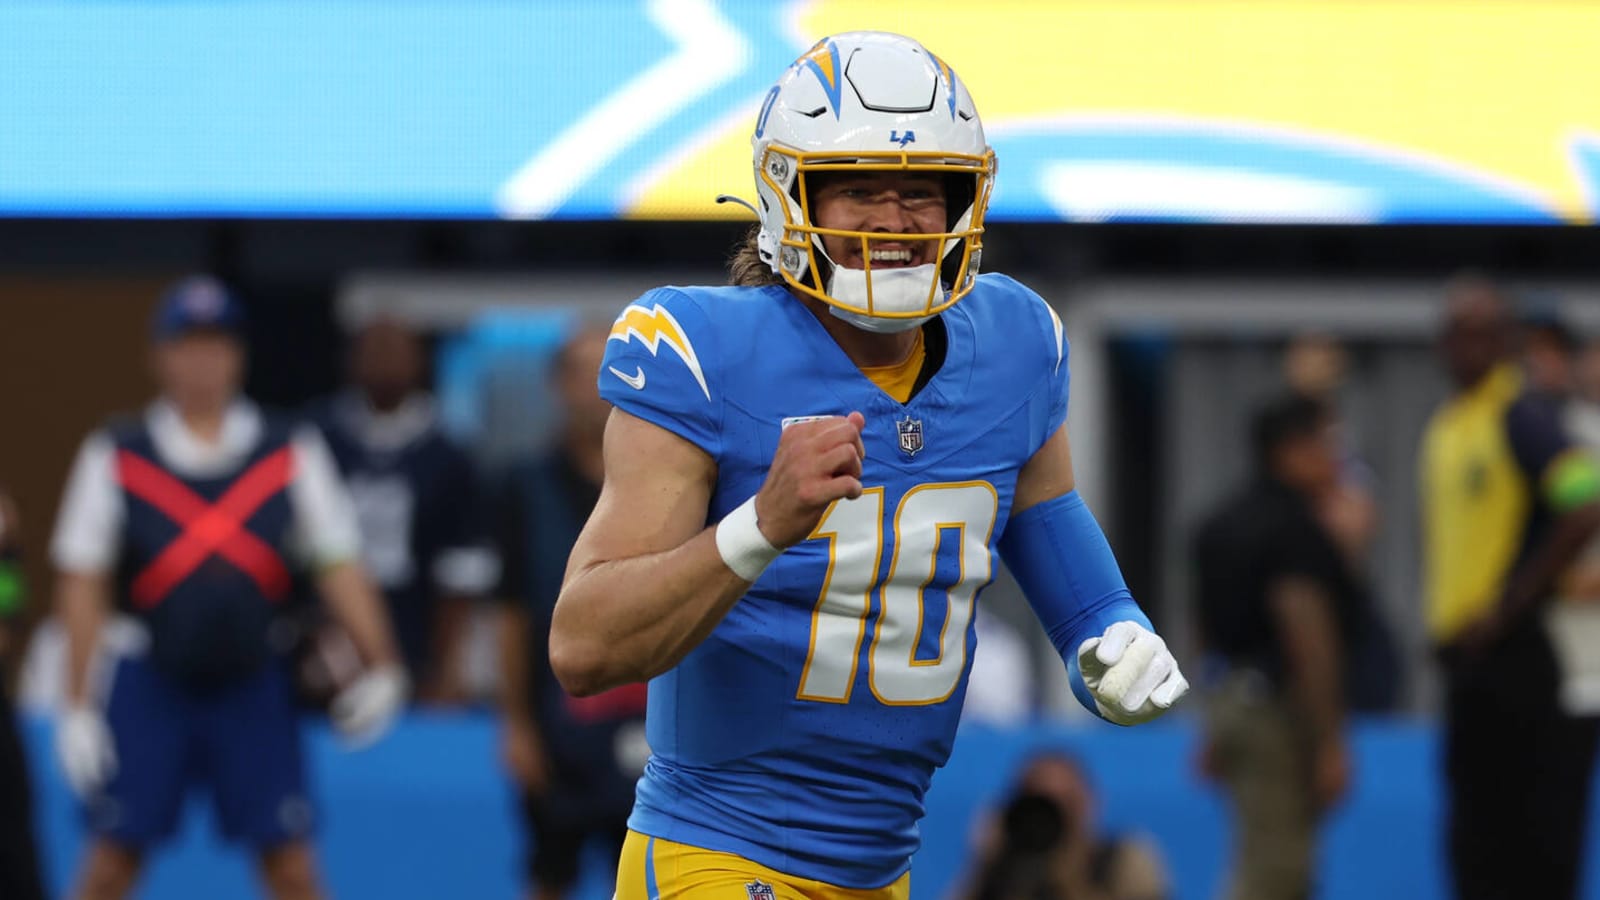 Watch: Chargers QB Justin Herbert completes pass to himself for first down on 'Monday Night Football'